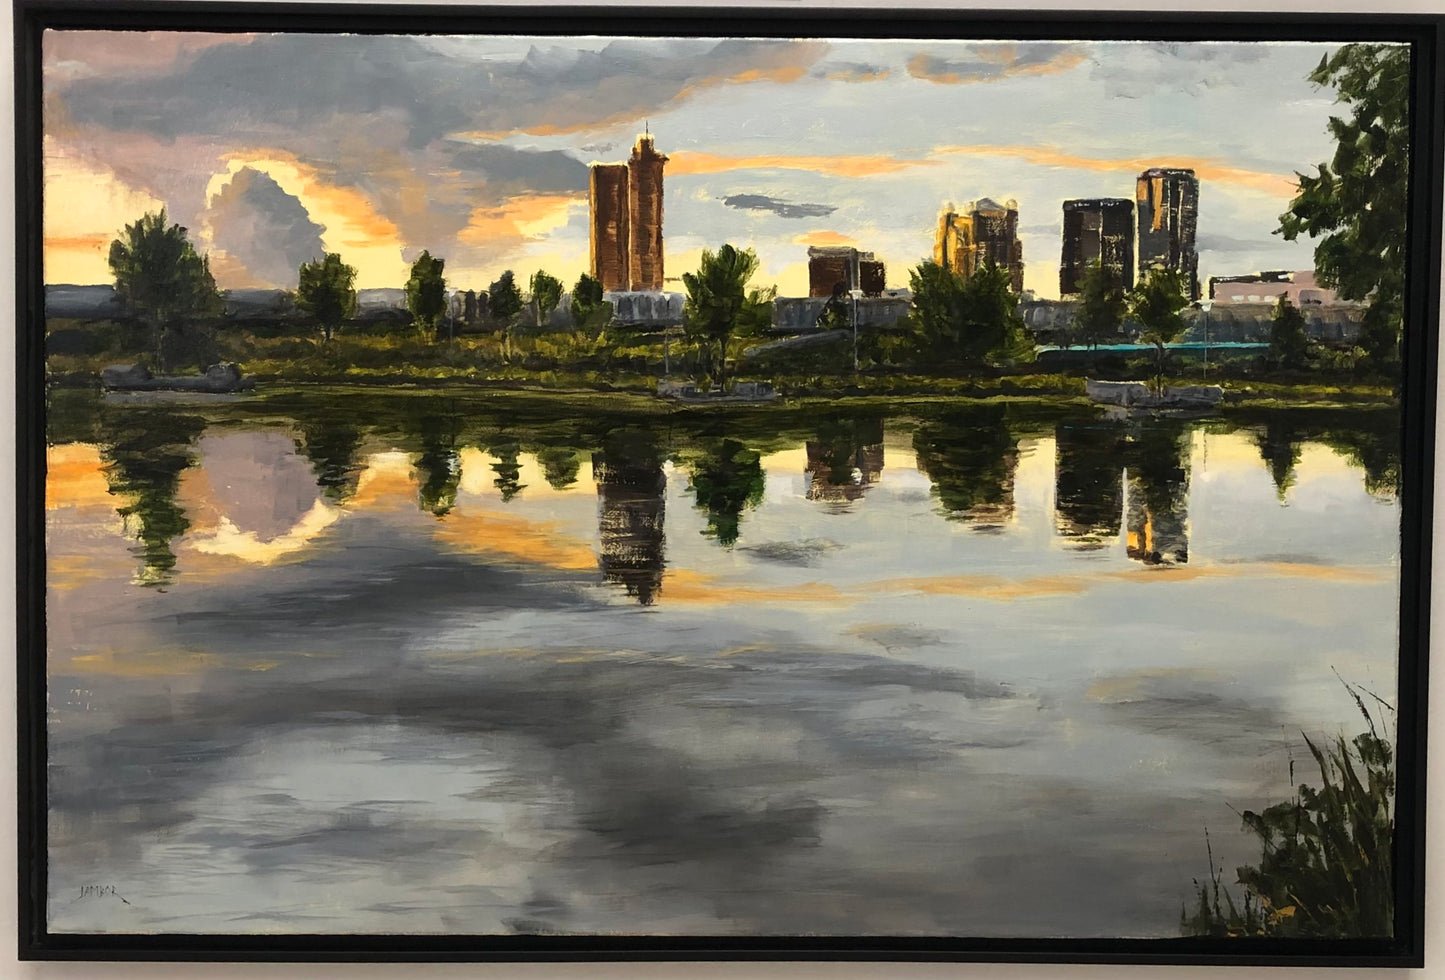 Day's End At Railroad Park 26 X 38 - Four Seasons Gallery